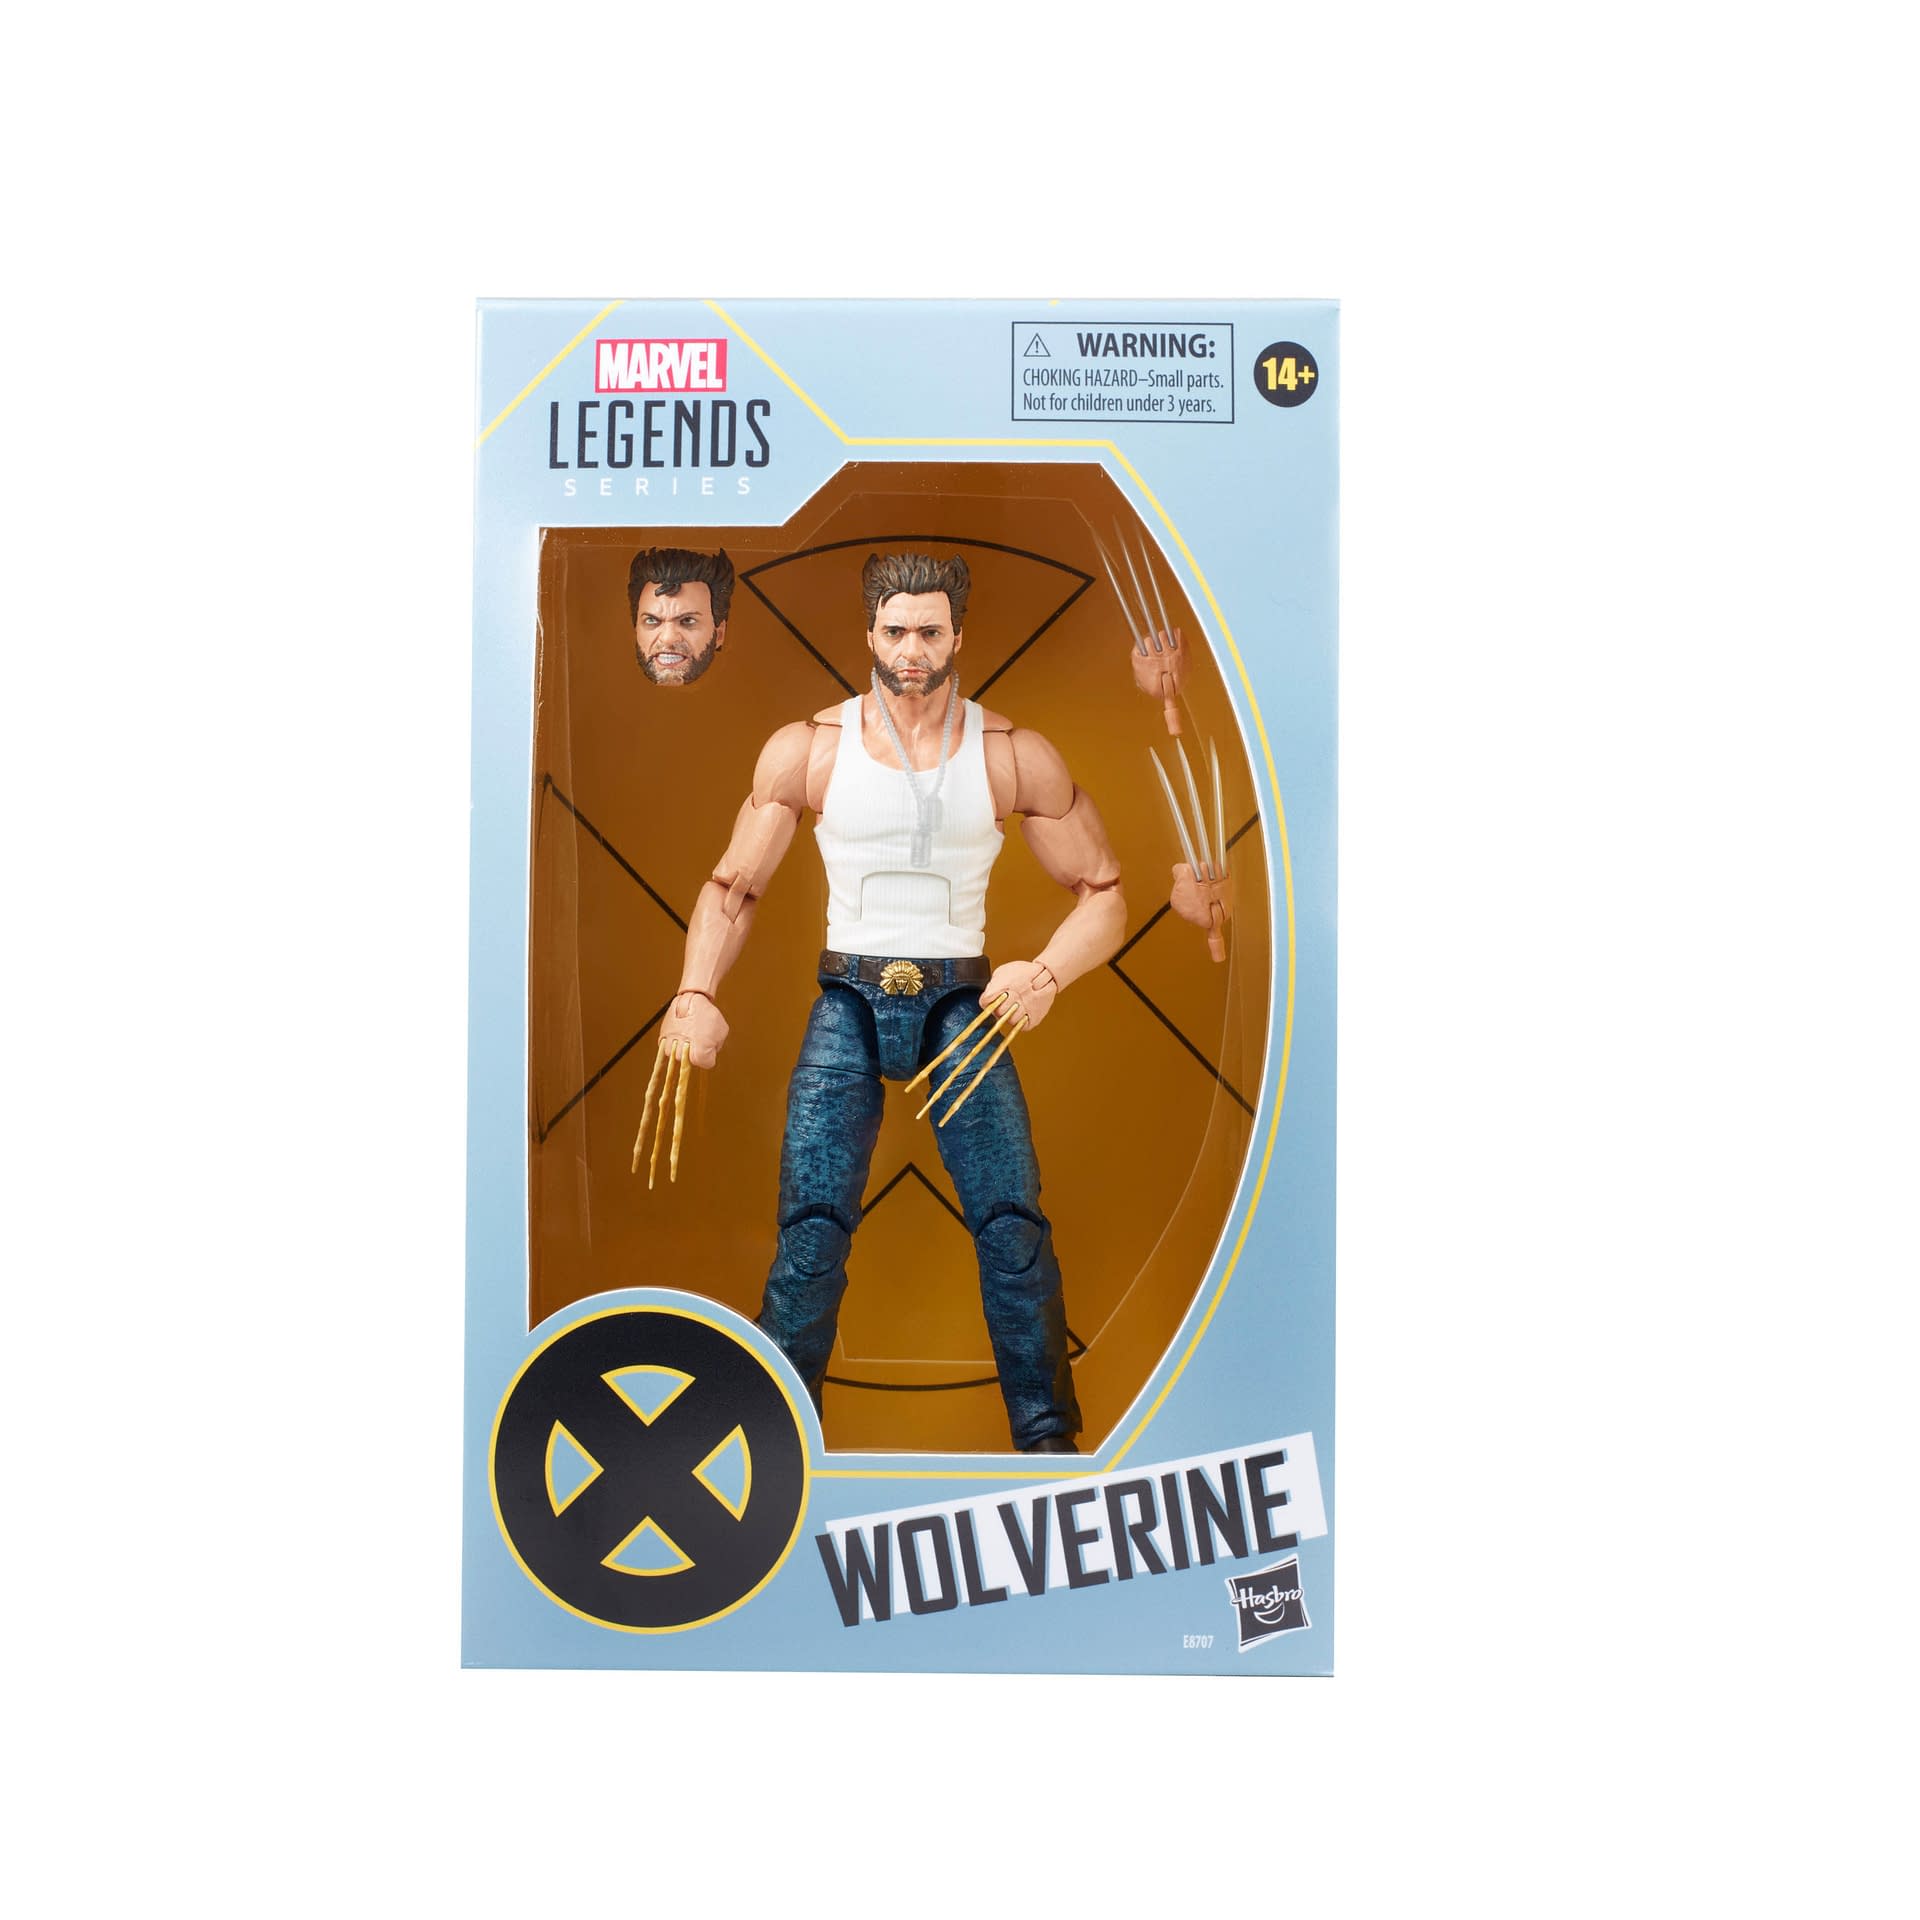 The X-Men Movies Come to Life with New Marvel Legends Wave